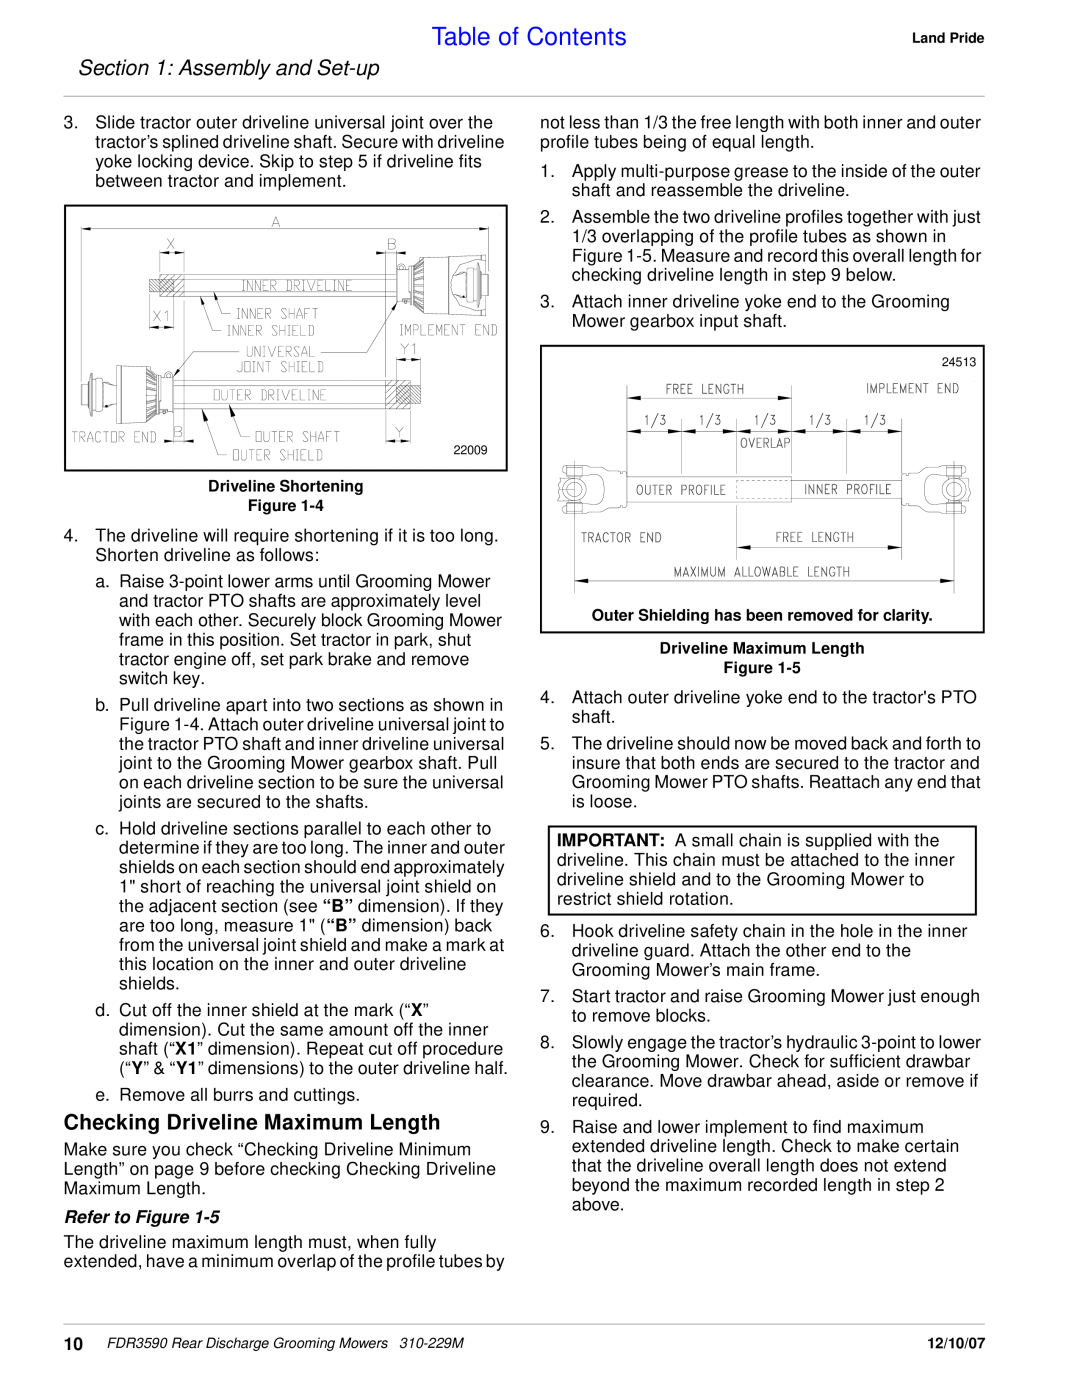 Land Pride FDR3590 manual Checking Driveline Maximum Length, Table of Contents, Assembly and Set-up, Refer to Figure 